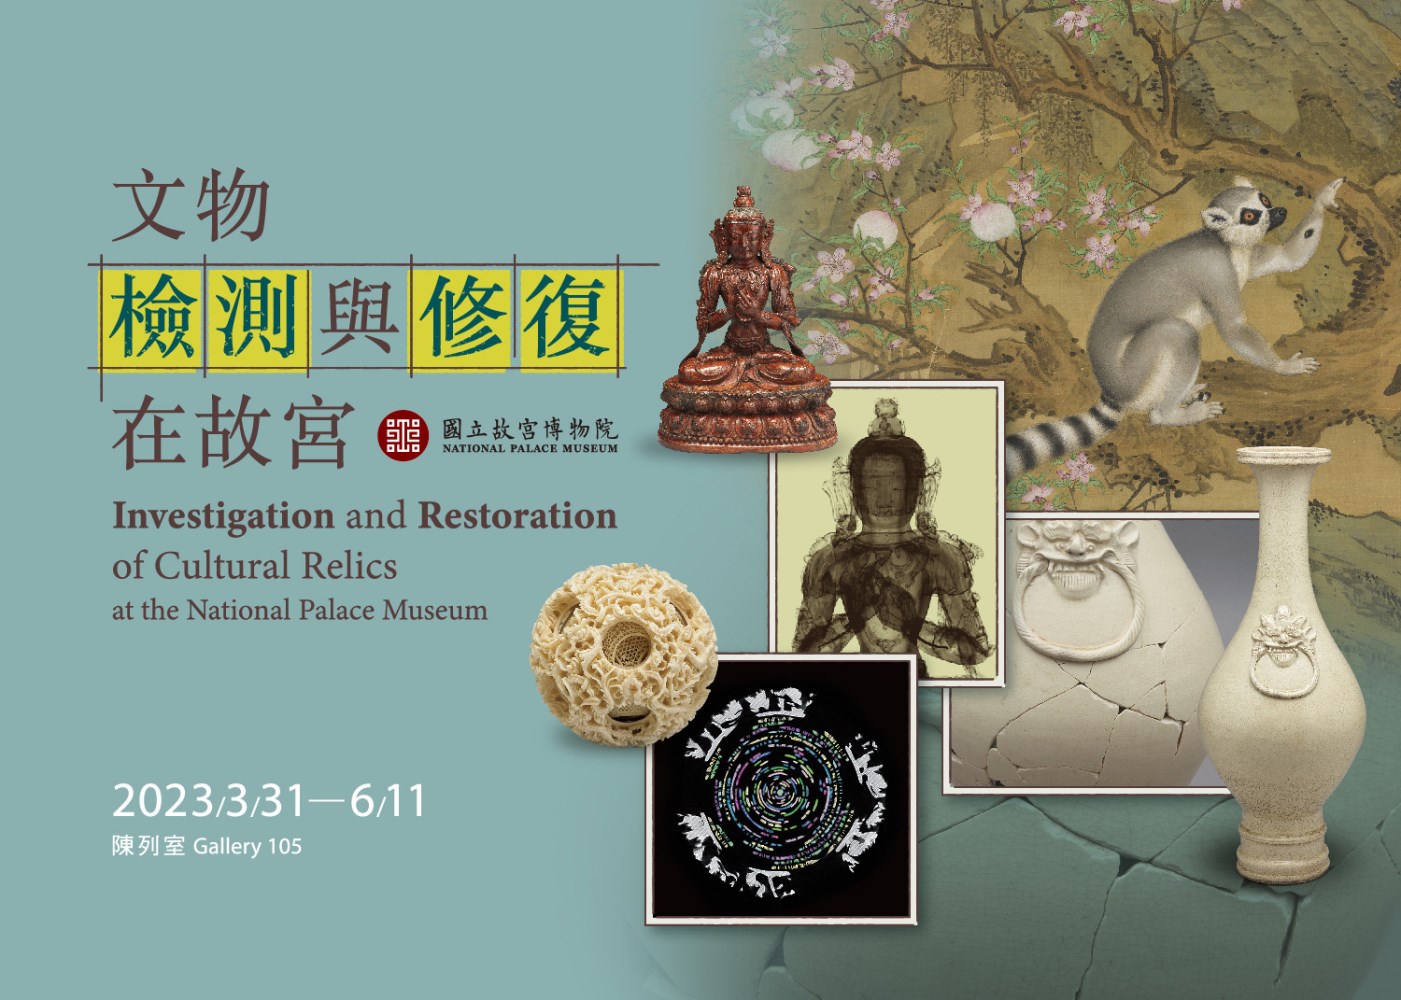 Investigation and Restoration of Cultural Relics at the National Palace Museum